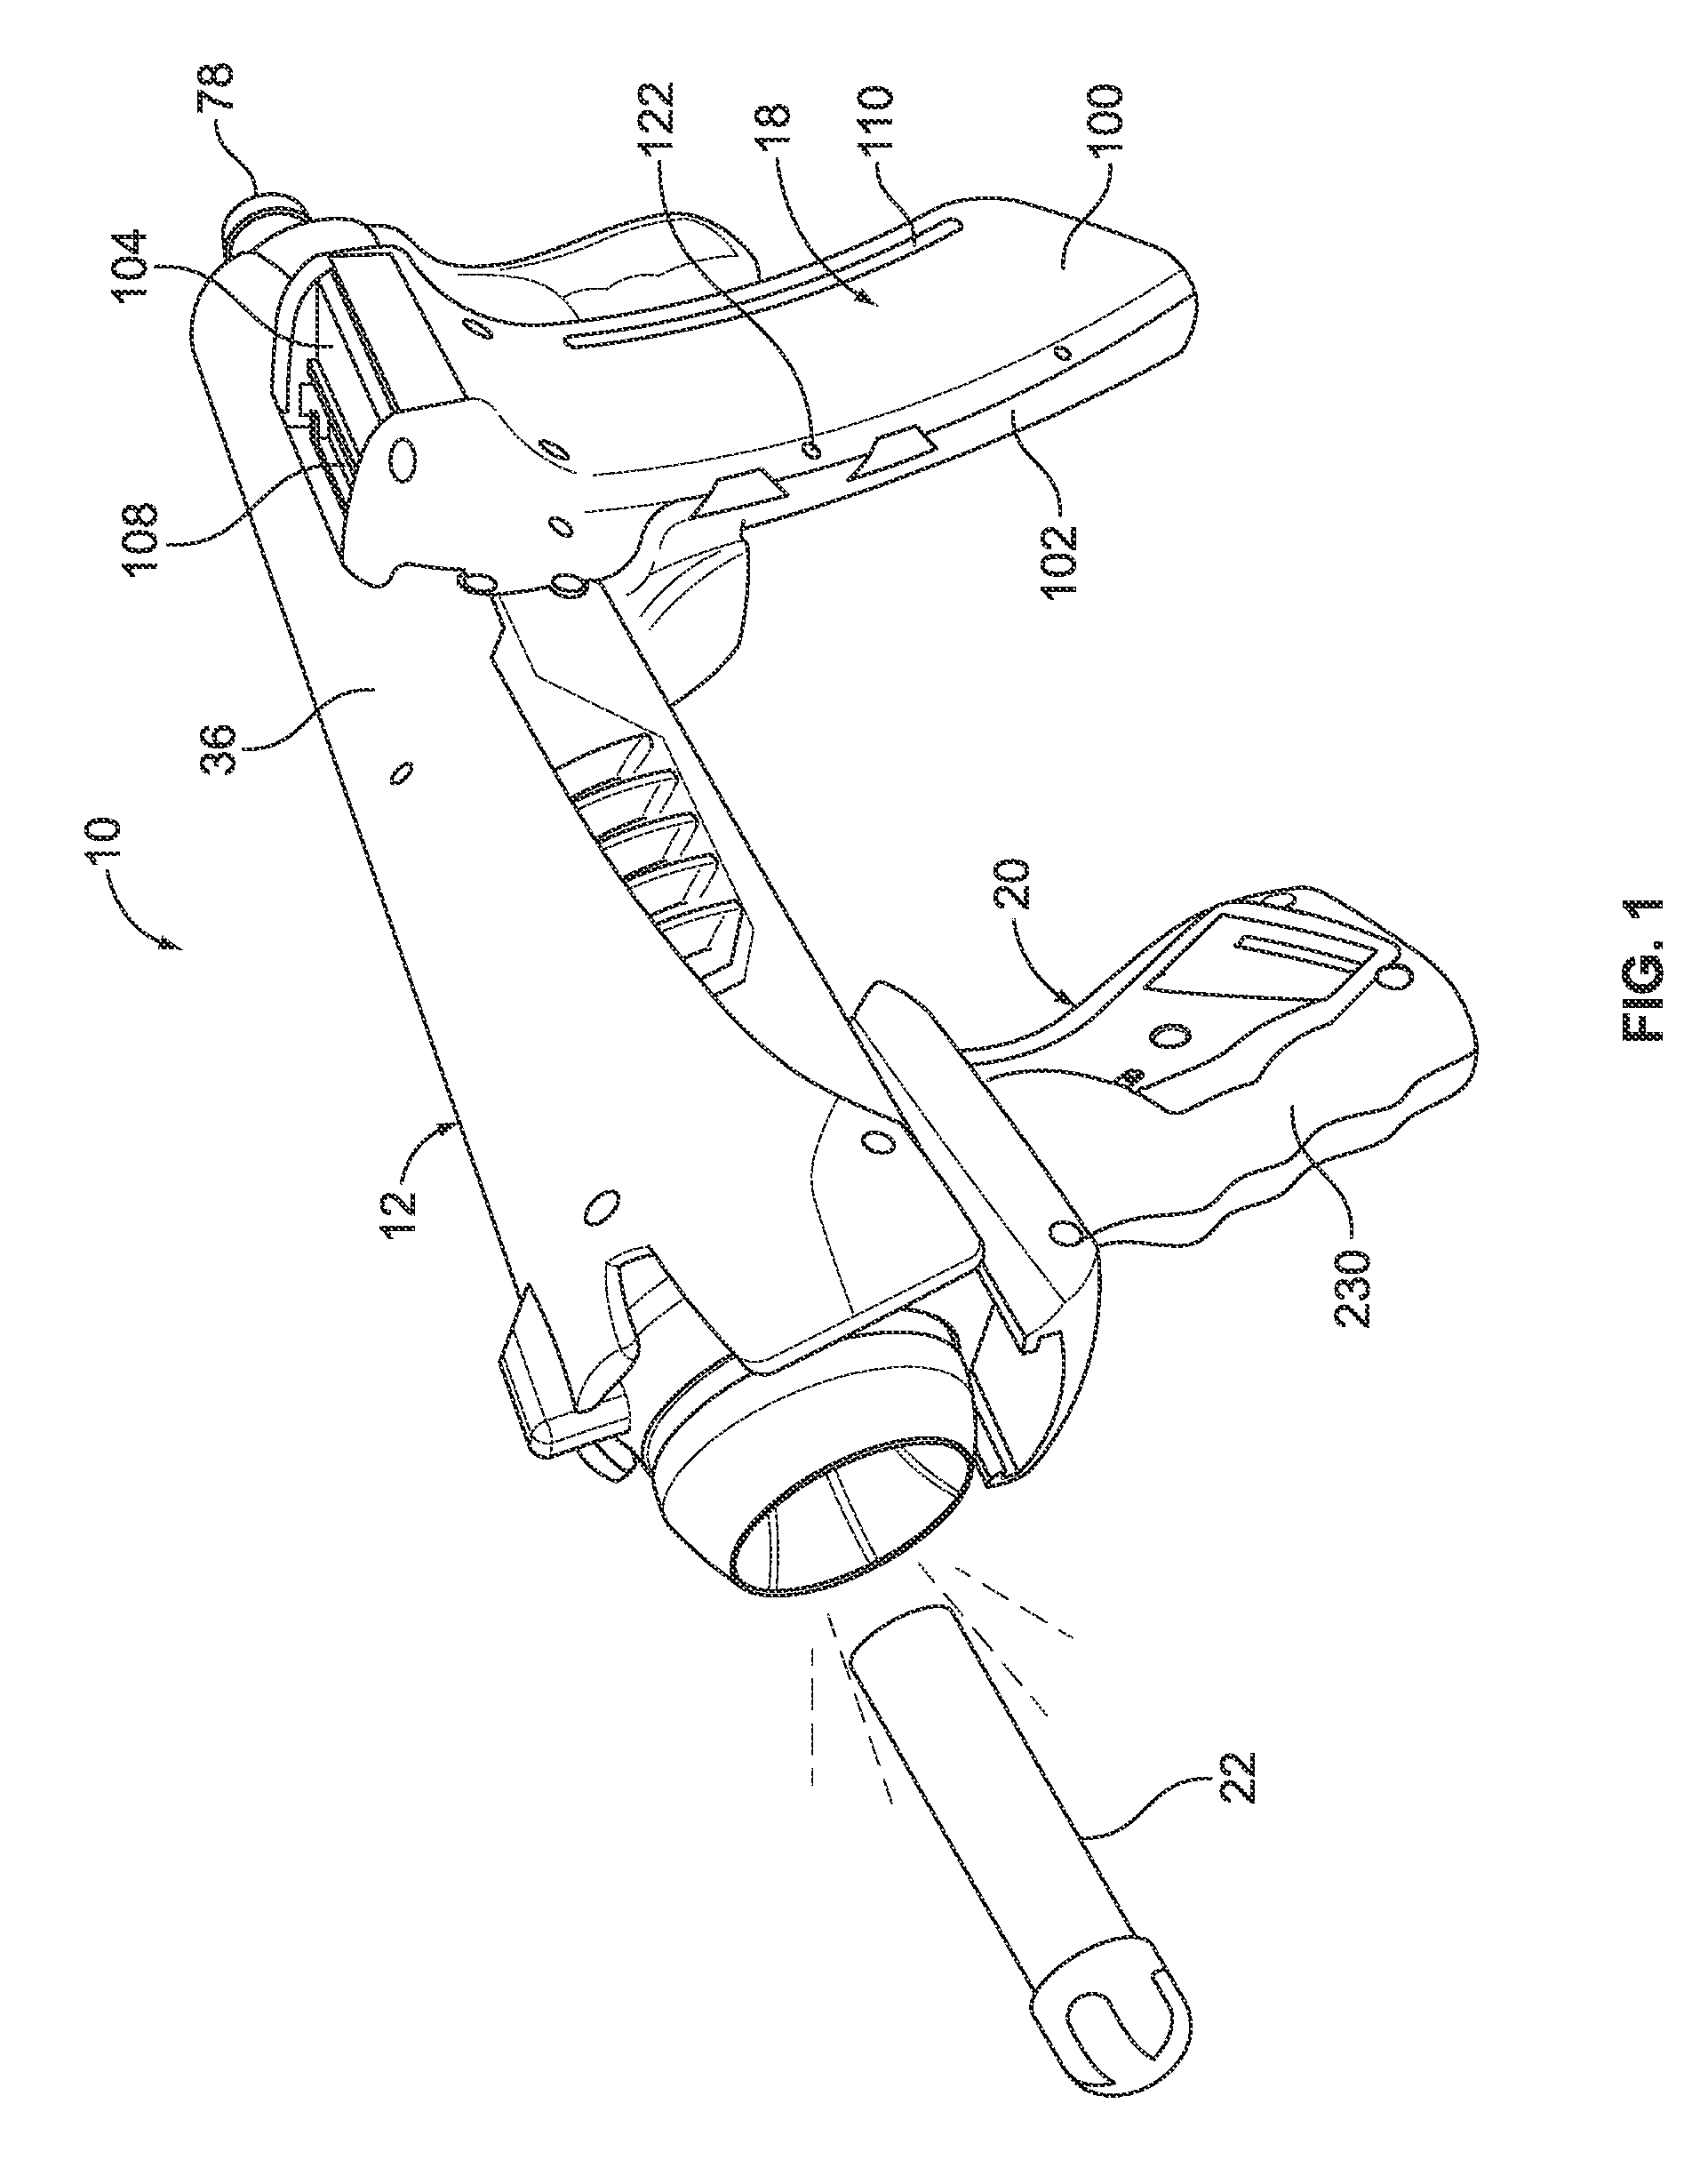 Toy launcher apparatus with fixed loadable magazine